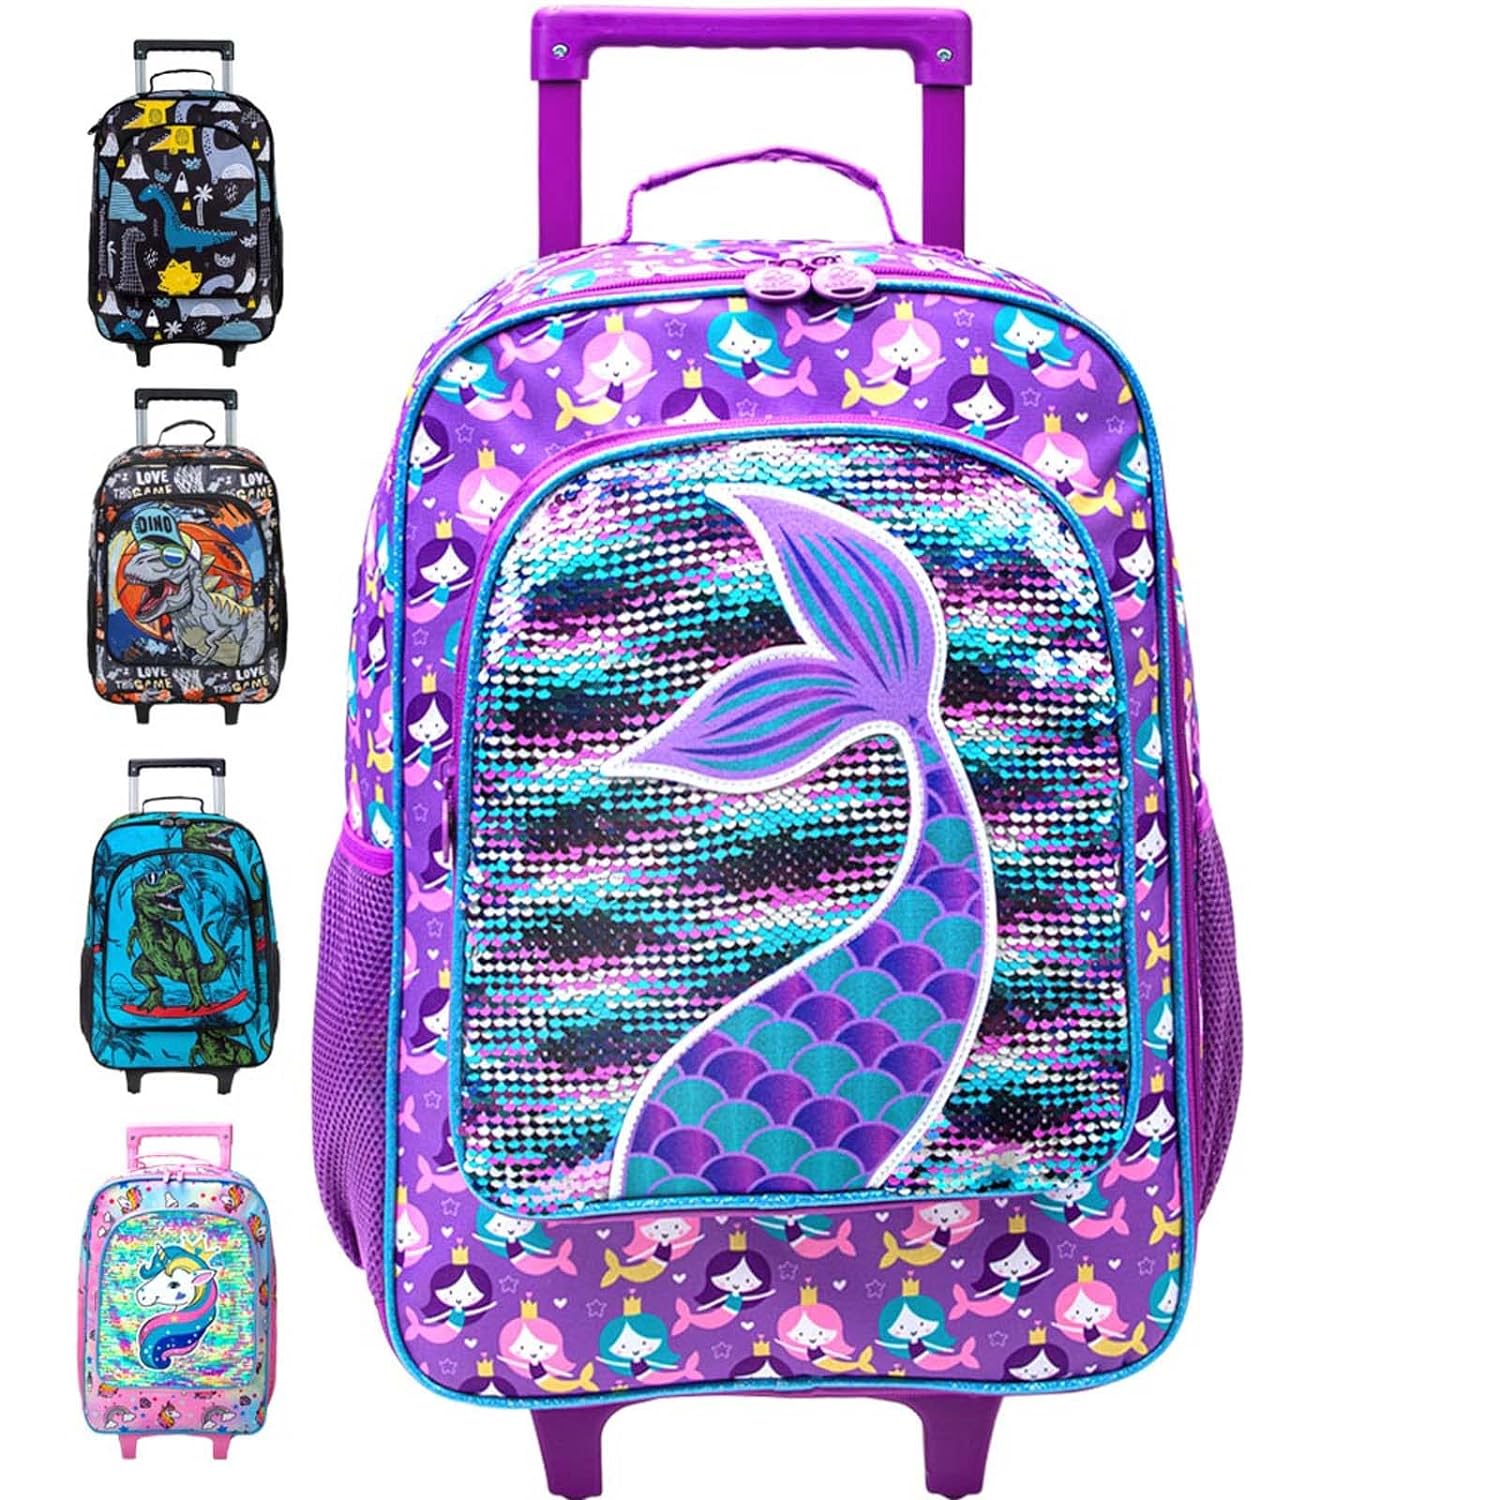 gxtvo Kids Suitcase with Wheels for Girls, Mermaid Rolling carry on Luggage for Toddler Children